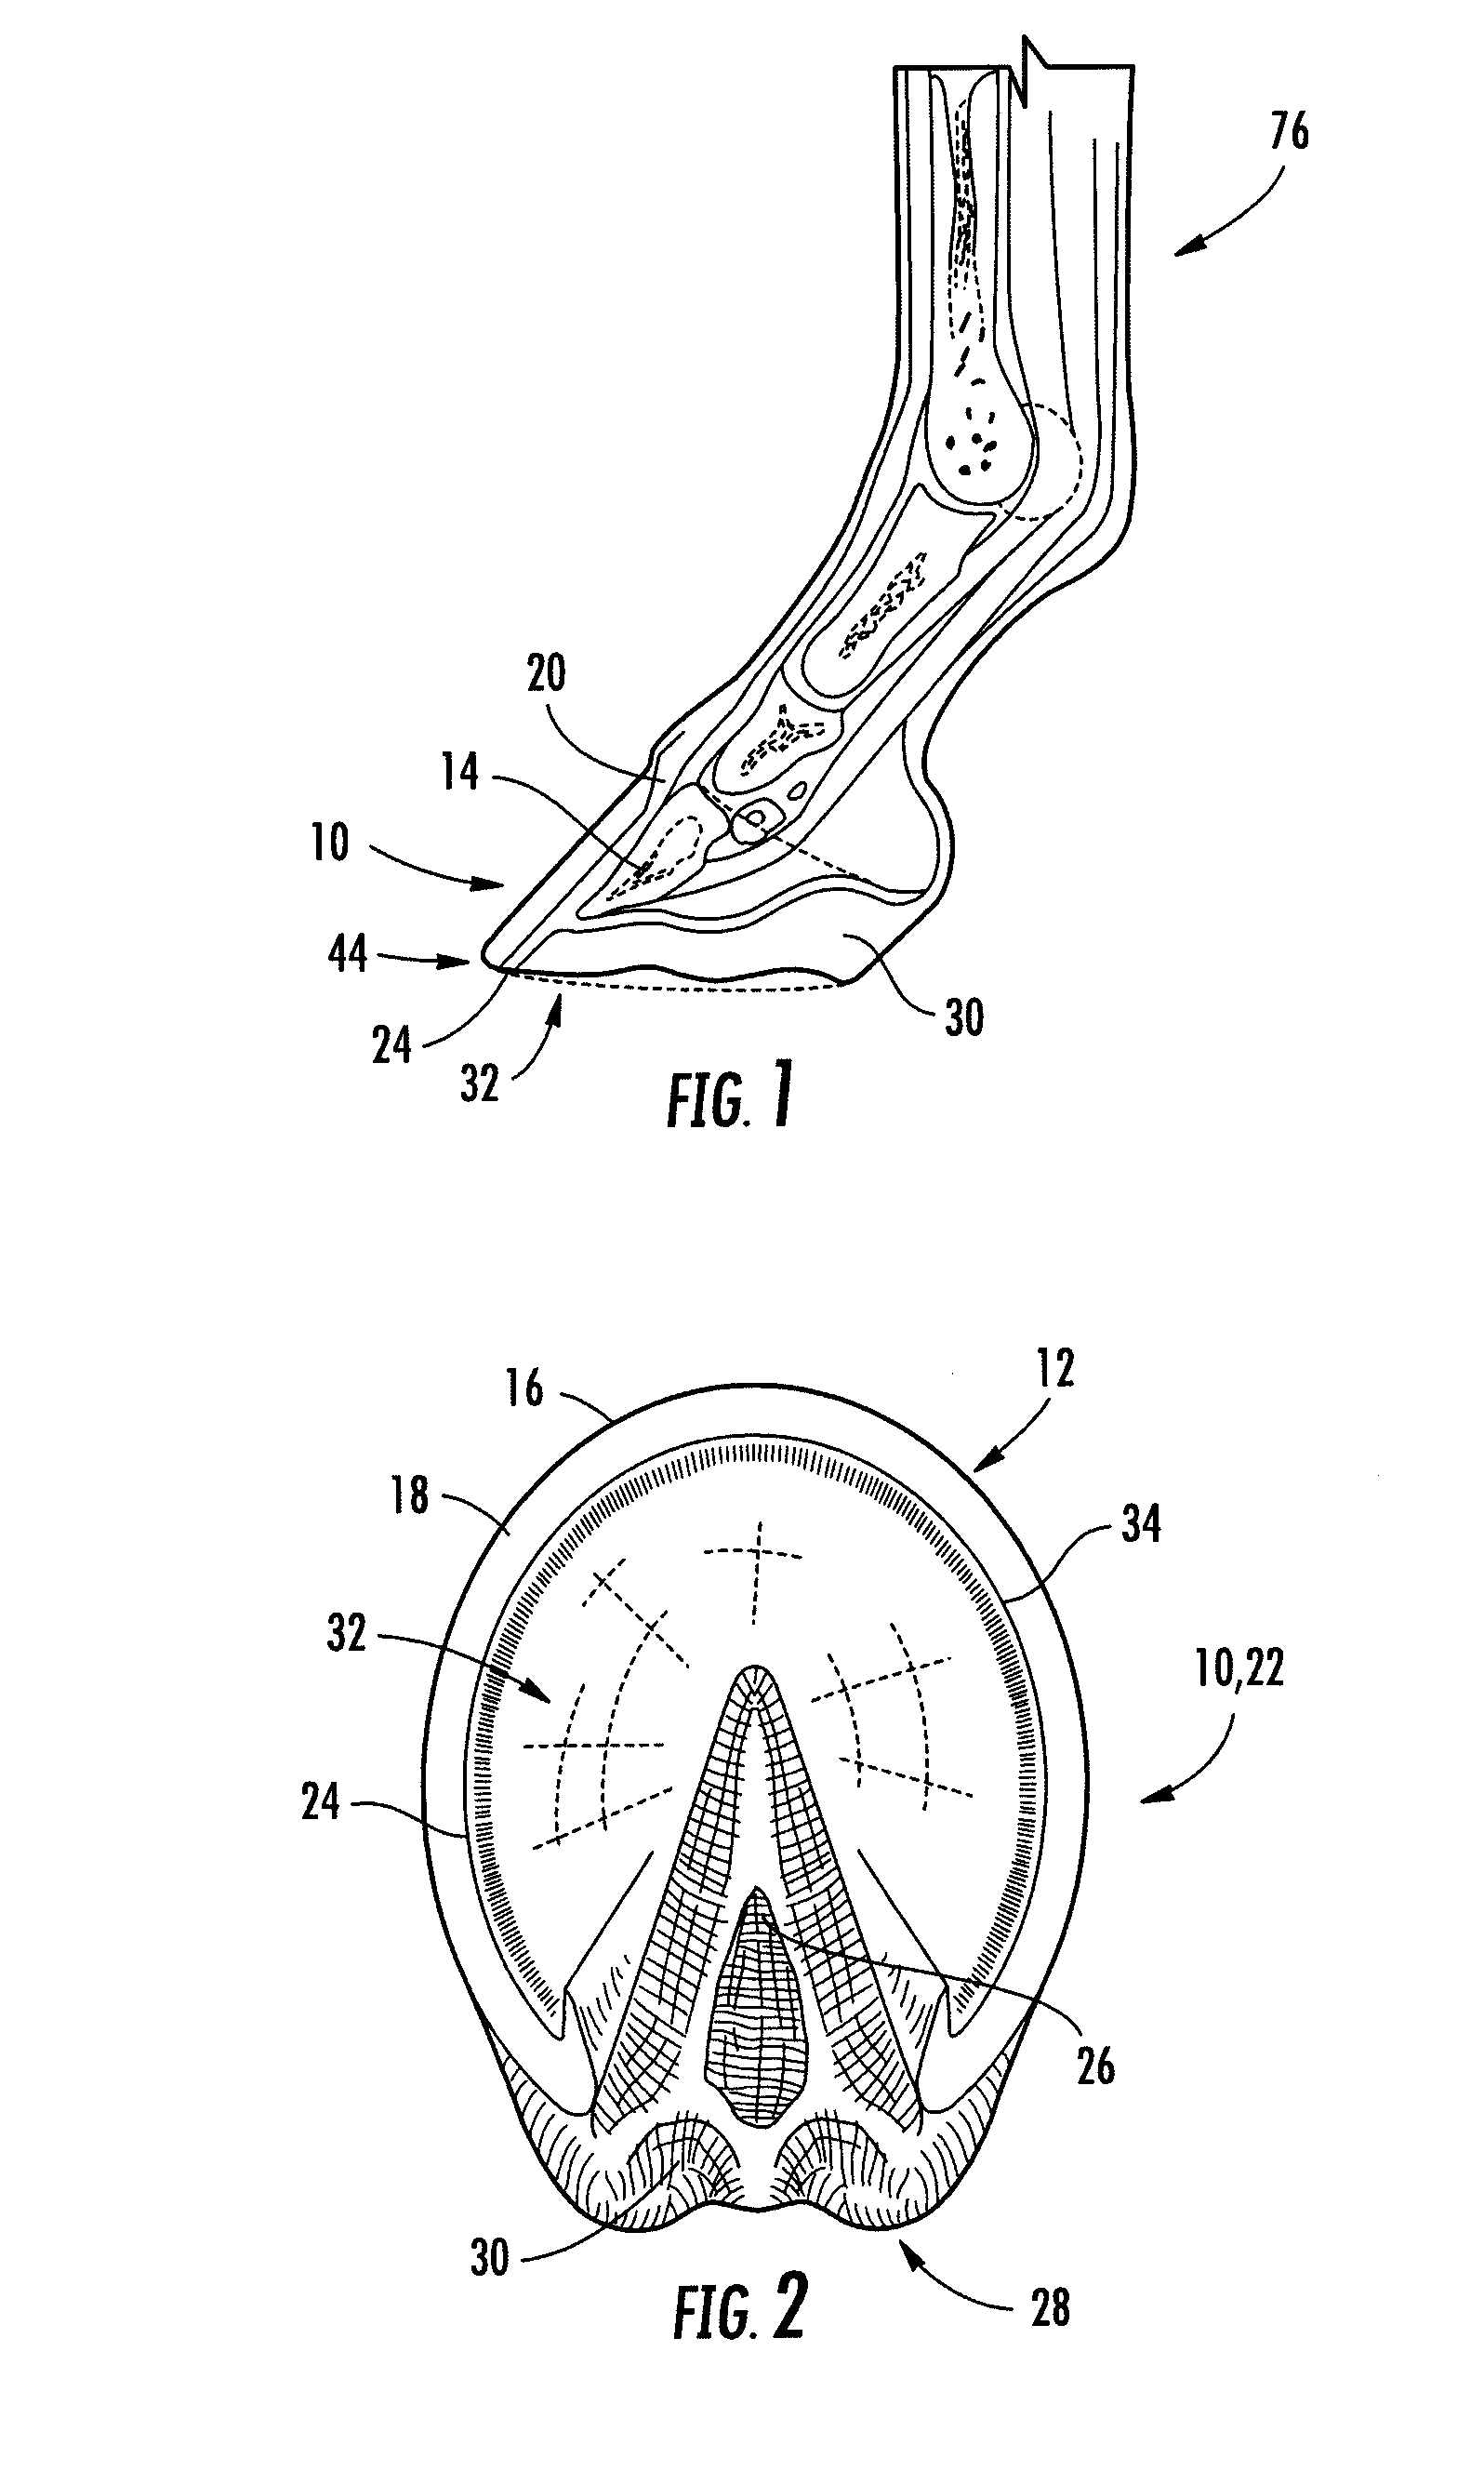 Cryotherapy device for treatment or prevention of laminitis in equine